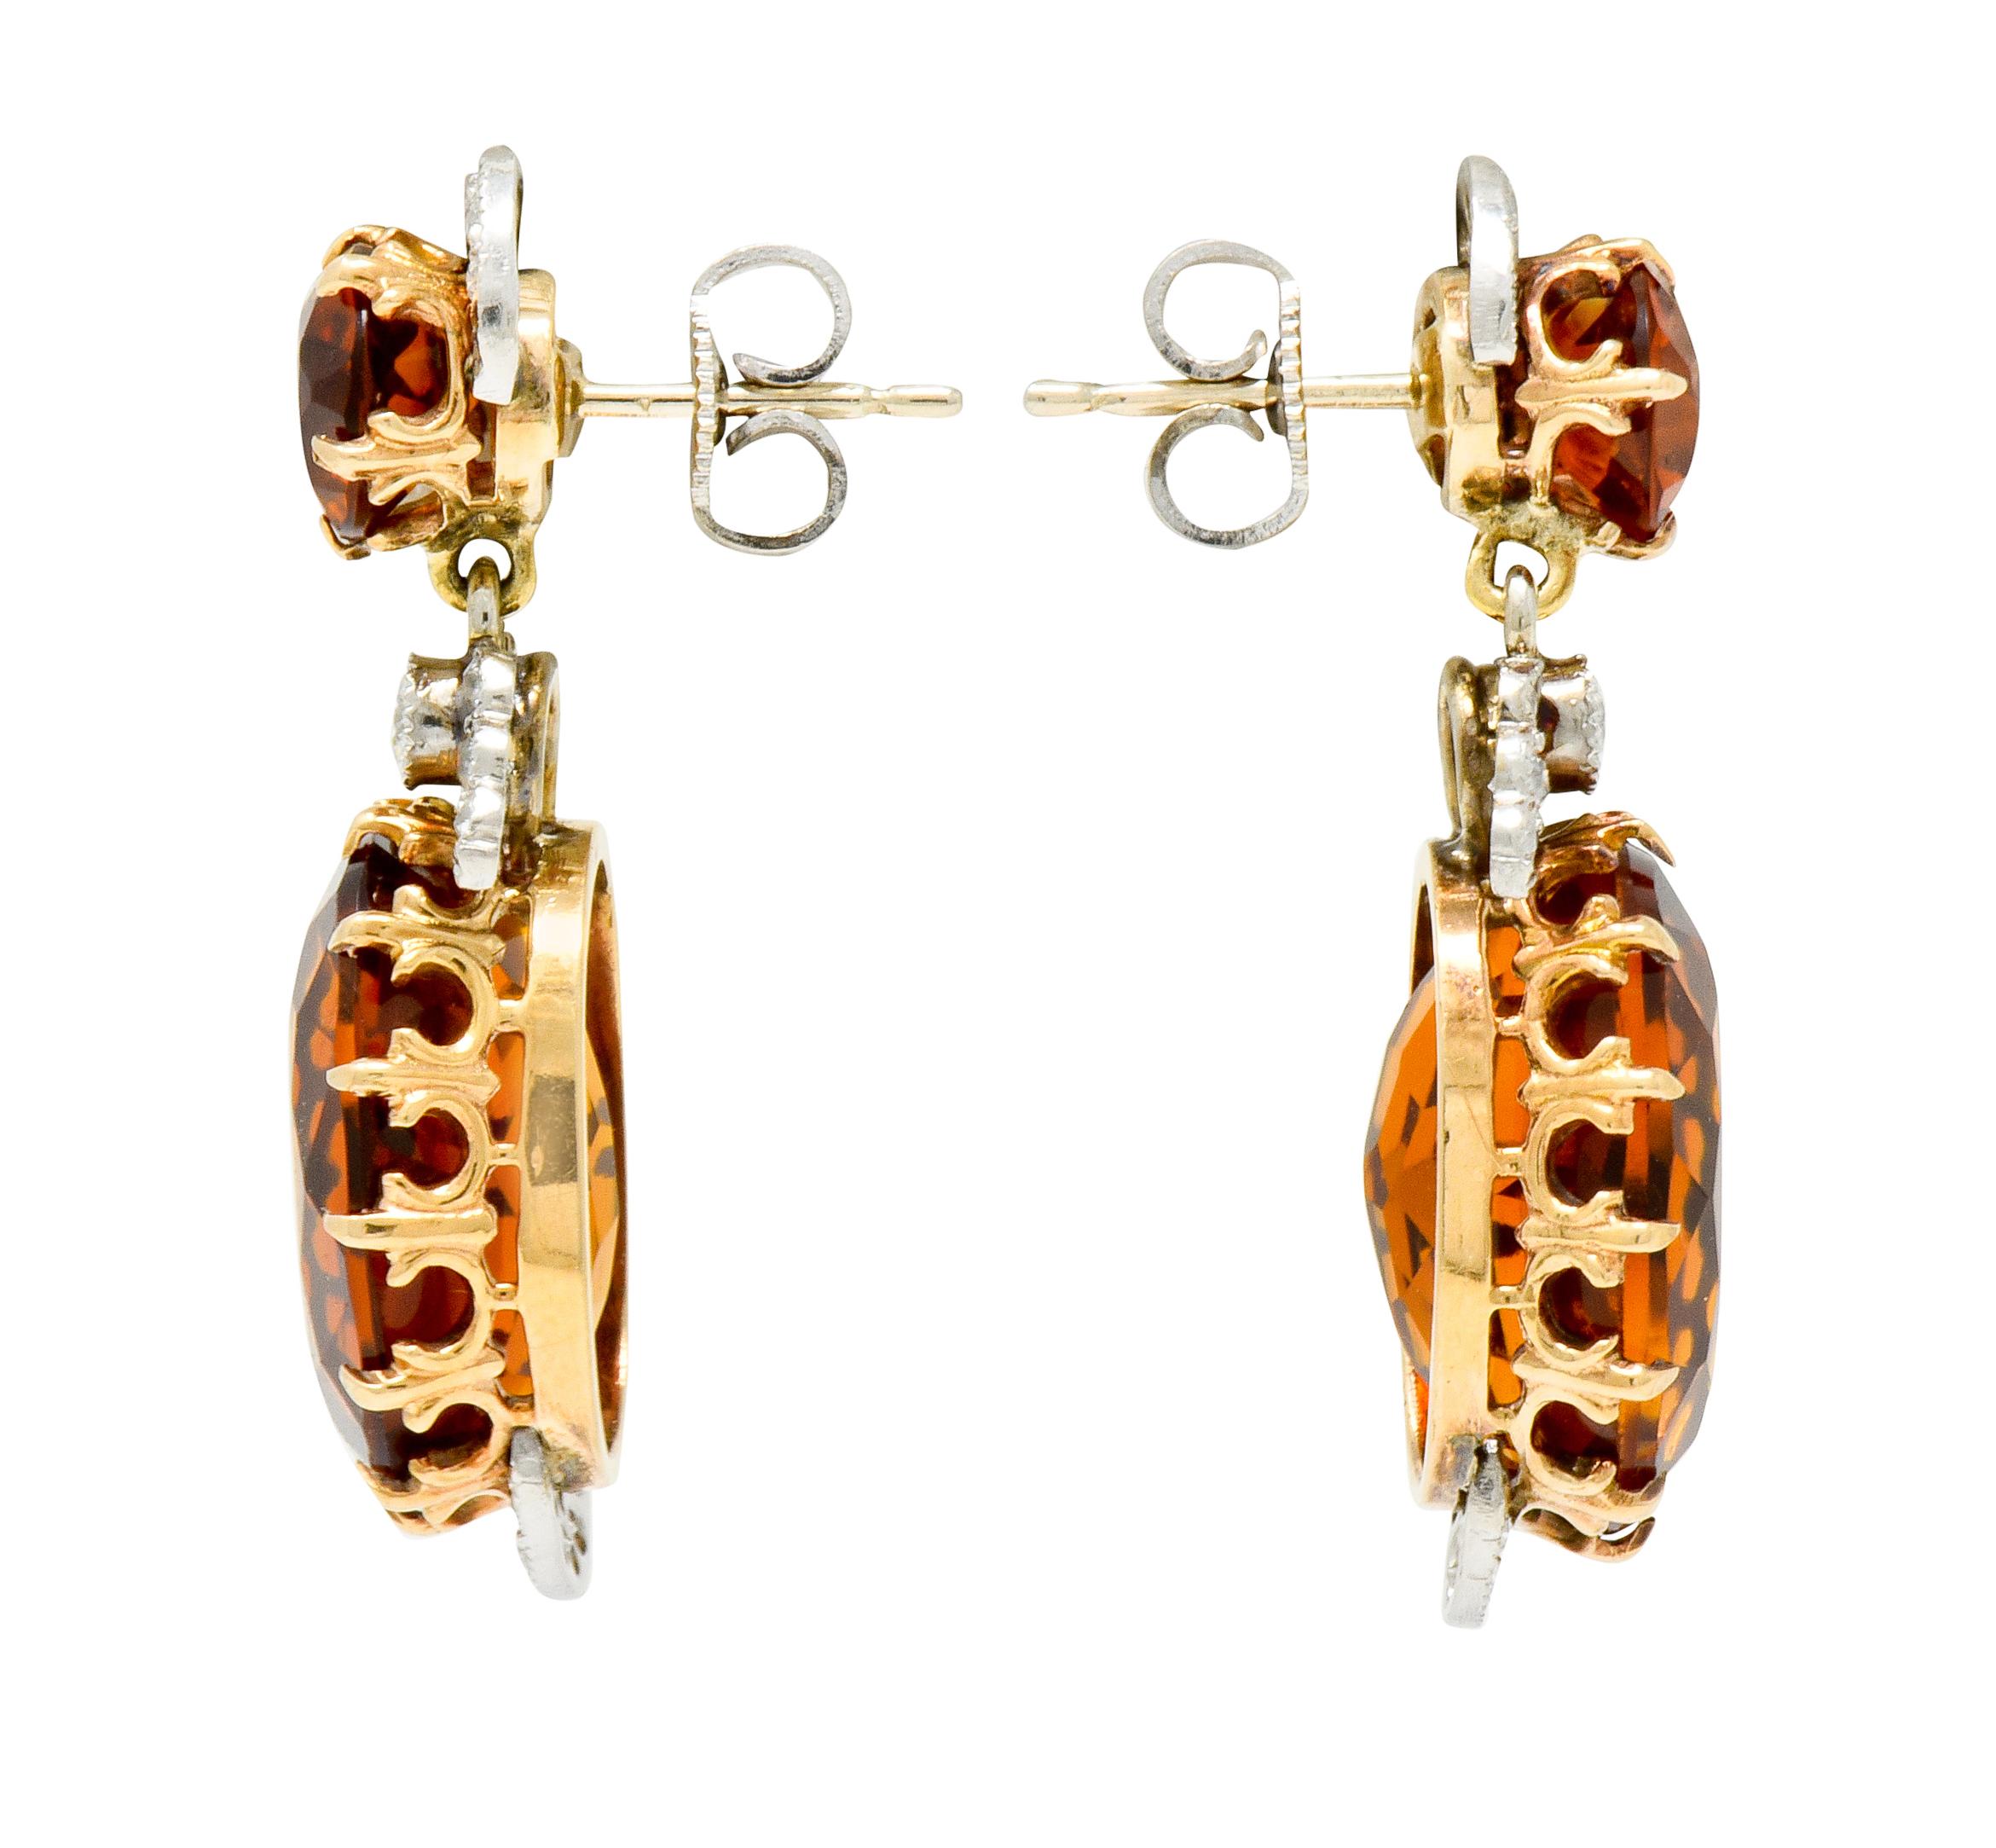 Earrings designed with a round cut Maderia citrine surmount suspending an articulated drop comprised of an oval cut Maderia citrine

Claw set in polished gold by stylized foliate prongs with total citrine weight approximately 17.26 carats;